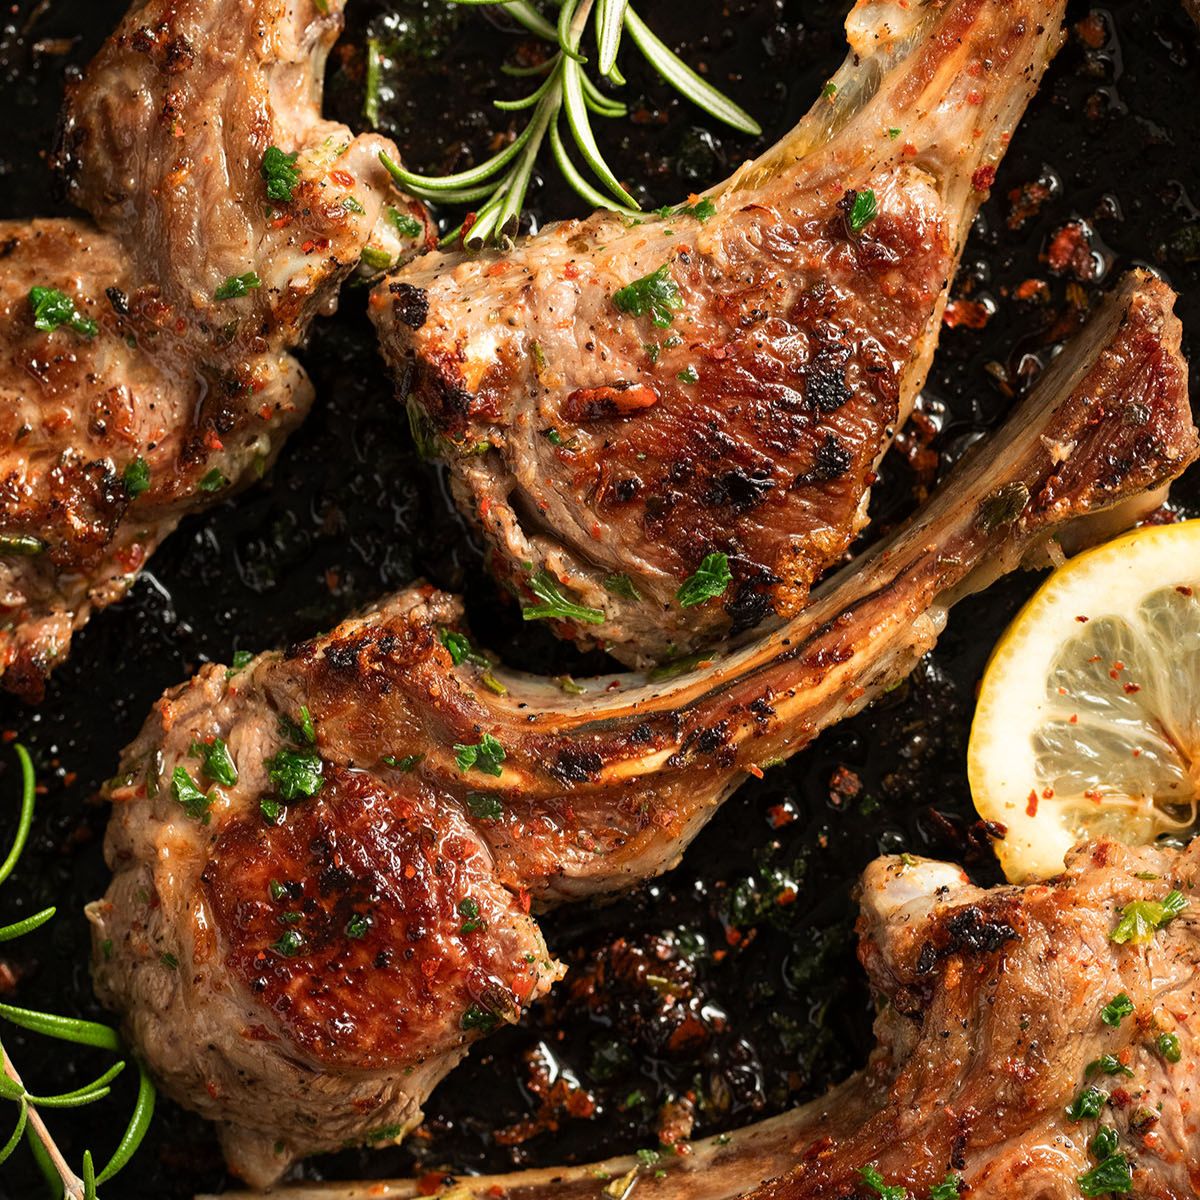 mediterranean lamb chops with rosemary and lemon slices.